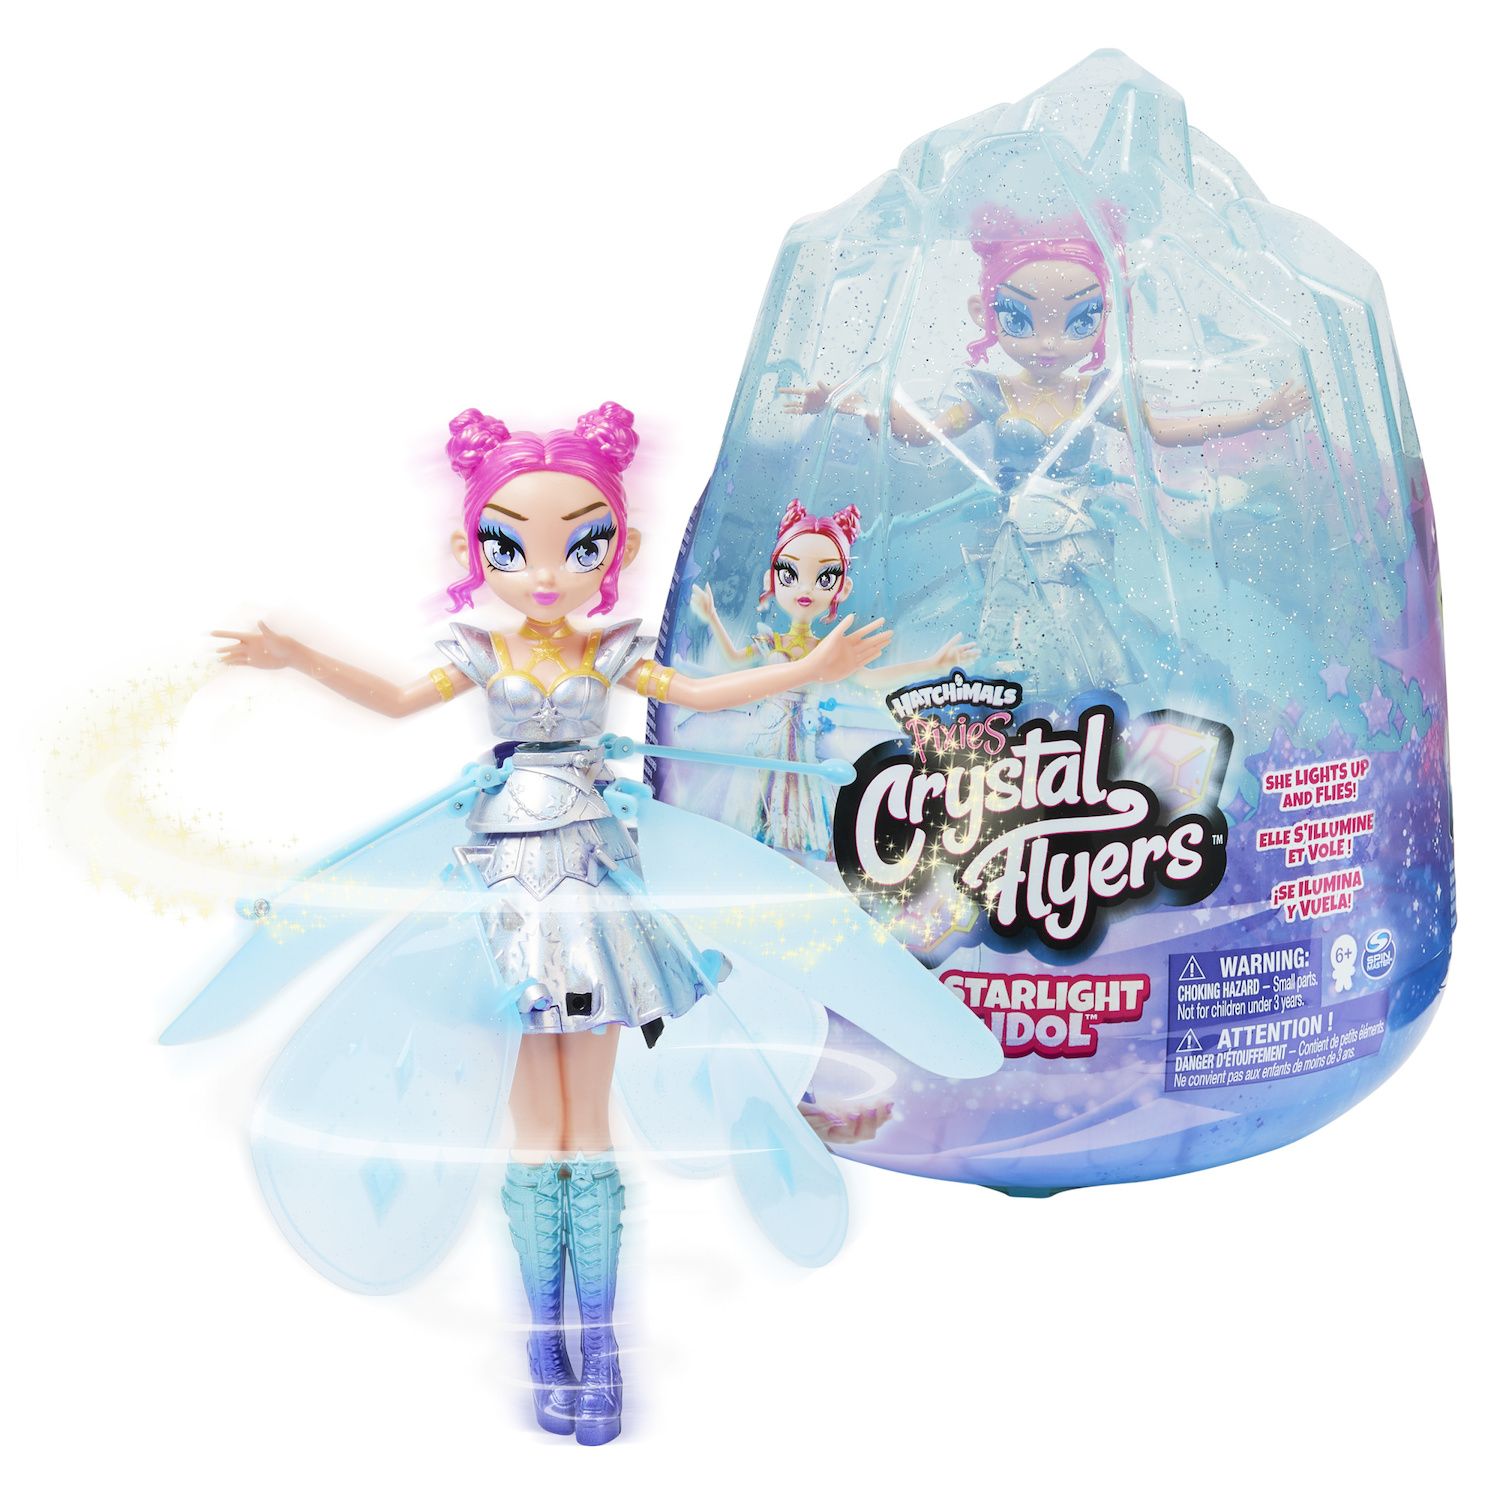 Image for Hatchimals Pixies Crystal Flyers Starlight Idol Magical Flying Pixie Toy at Kohl's.